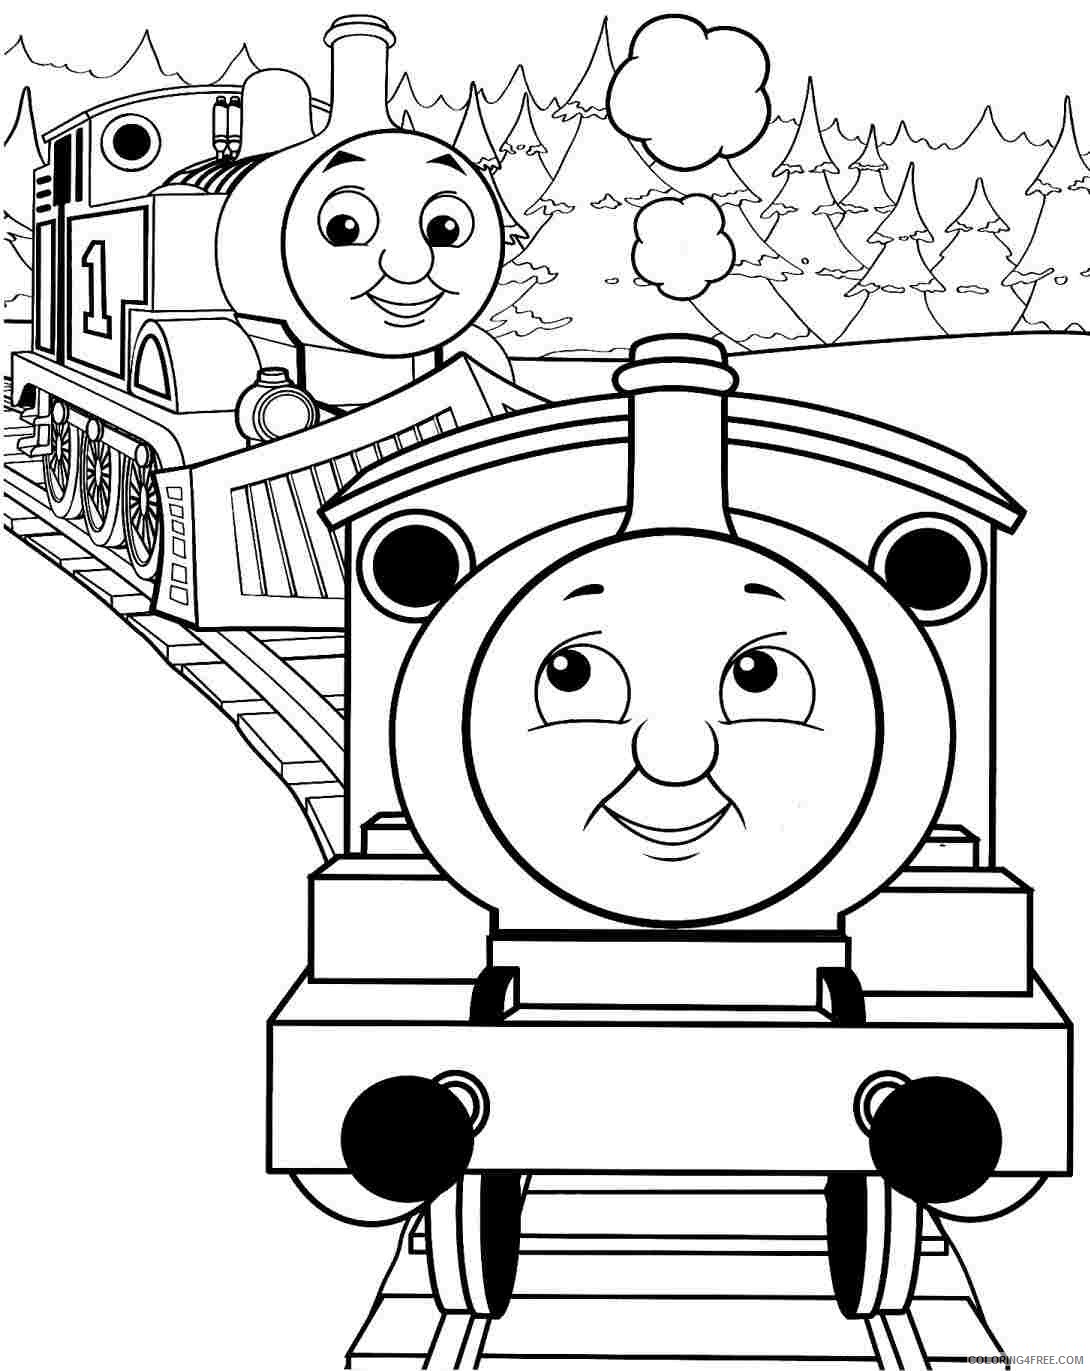 Download Thomas And Friends Coloring Pages With Percy Coloring4free Coloring4free Com